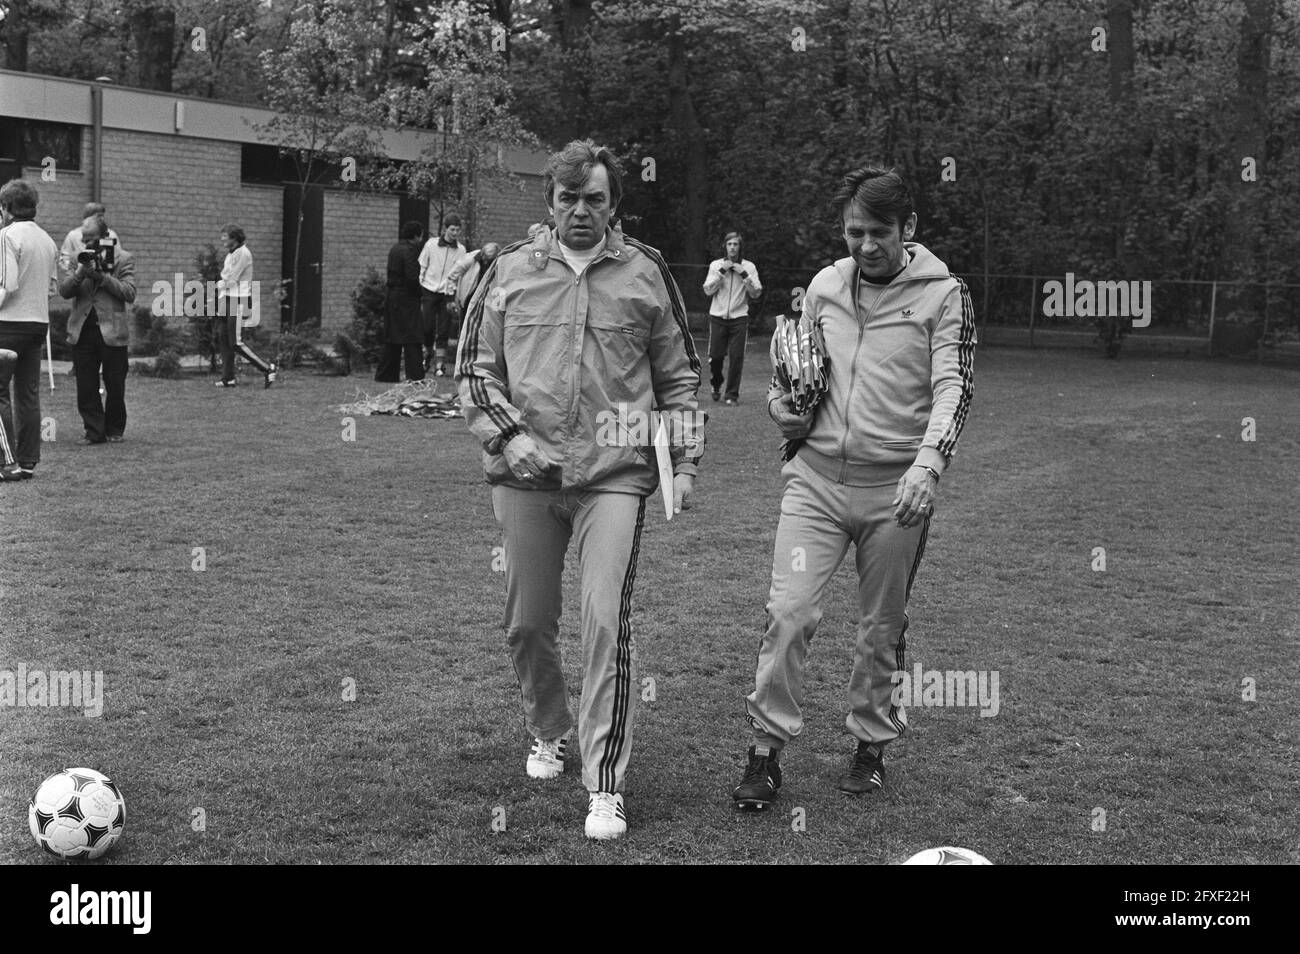 Training Dutch national team in Zeist; trainer Happel (l) and Zwartkruis, May 12, 1978, sports, trainers, soccer, The Netherlands, 20th century press agency photo, news to remember, documentary, historic photography 1945-1990, visual stories, human history of the Twentieth Century, capturing moments in time Stock Photo